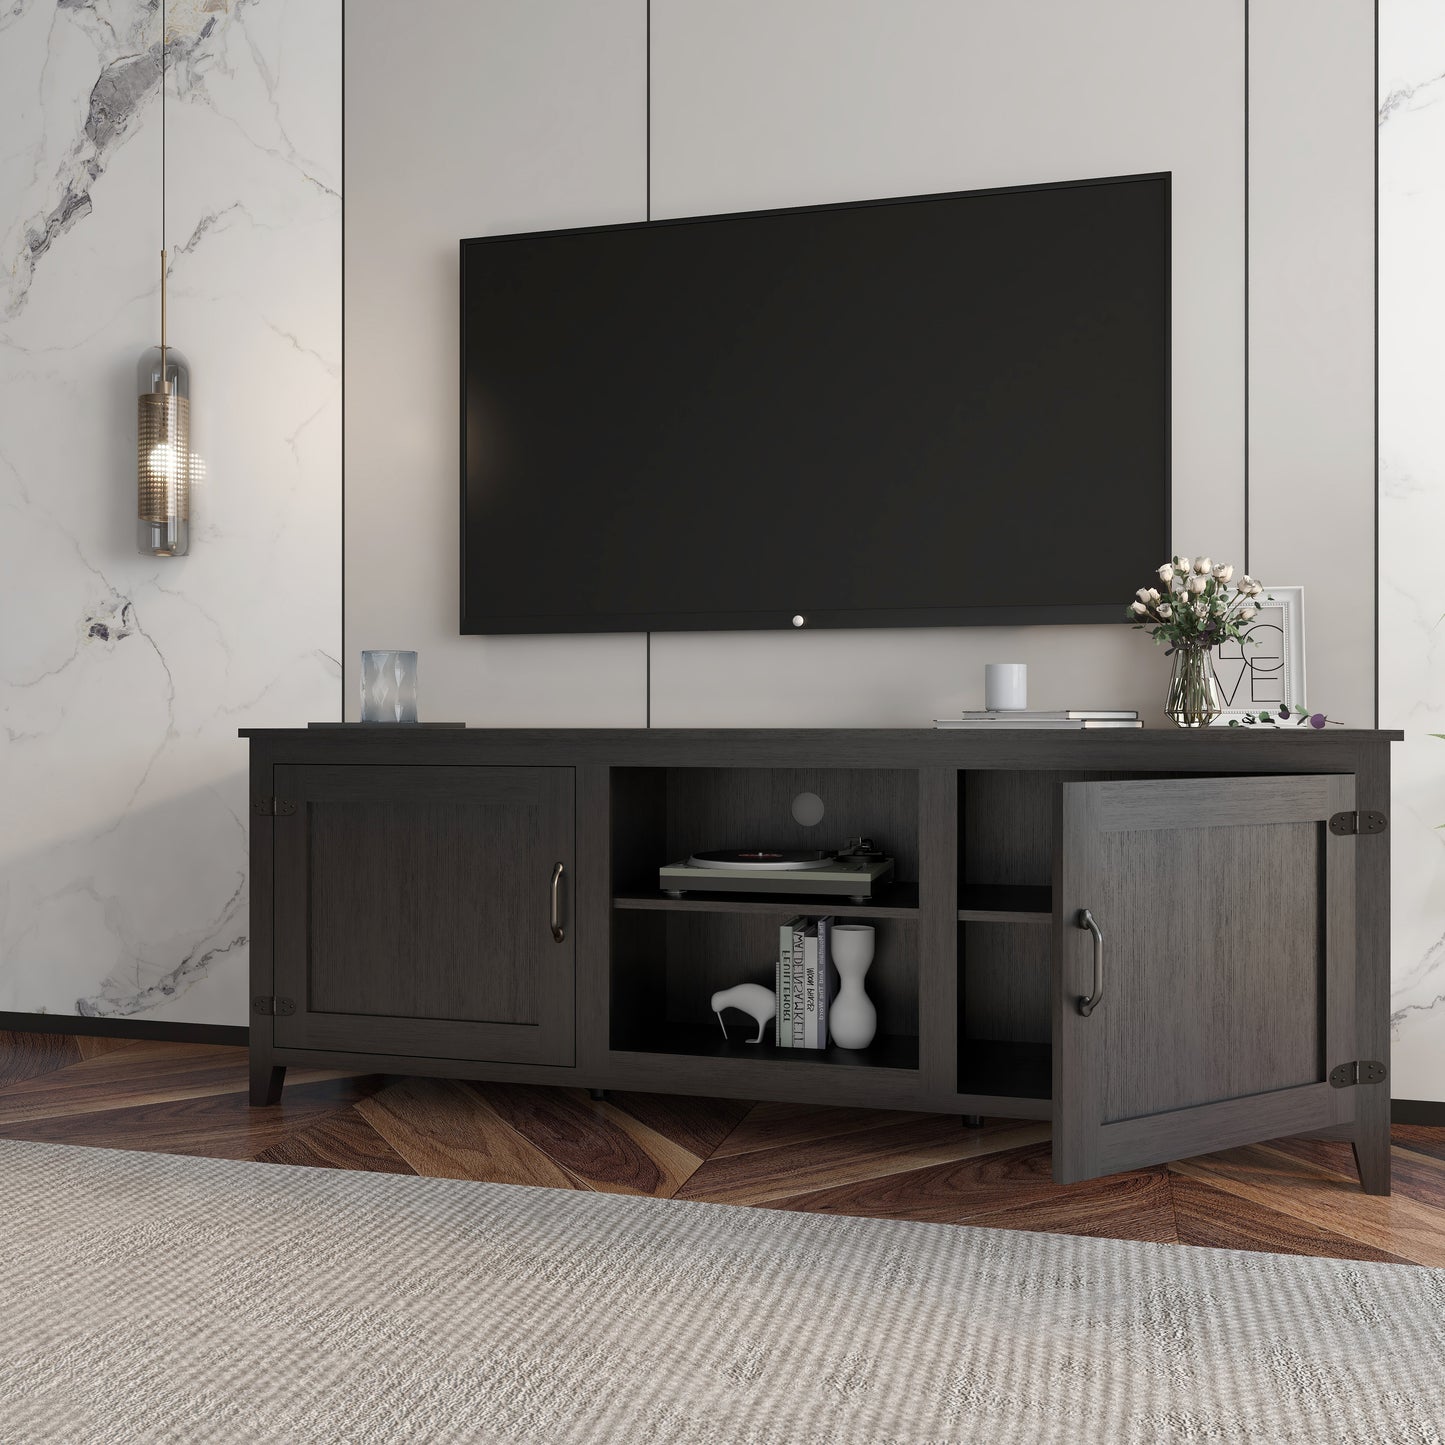 WESOME TV Stand Storage Media Console Entertainment Center with 2 Doors, Multiple Colors